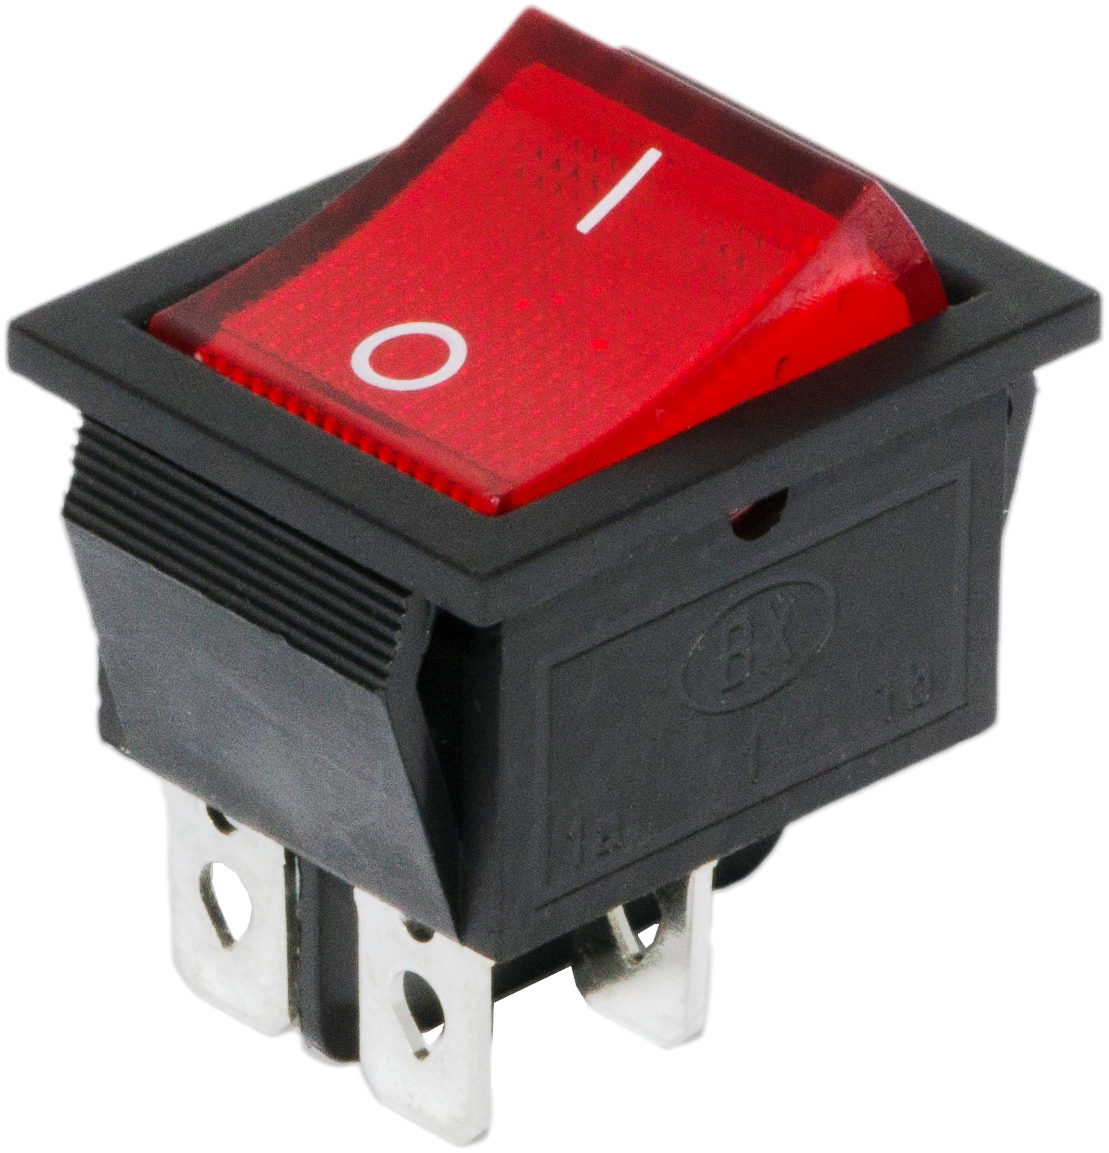 uxcell DPST 2 Positions 4 Terminal Red Button Boat Rocker Switch AC 16A/250V a14031700ux0256 